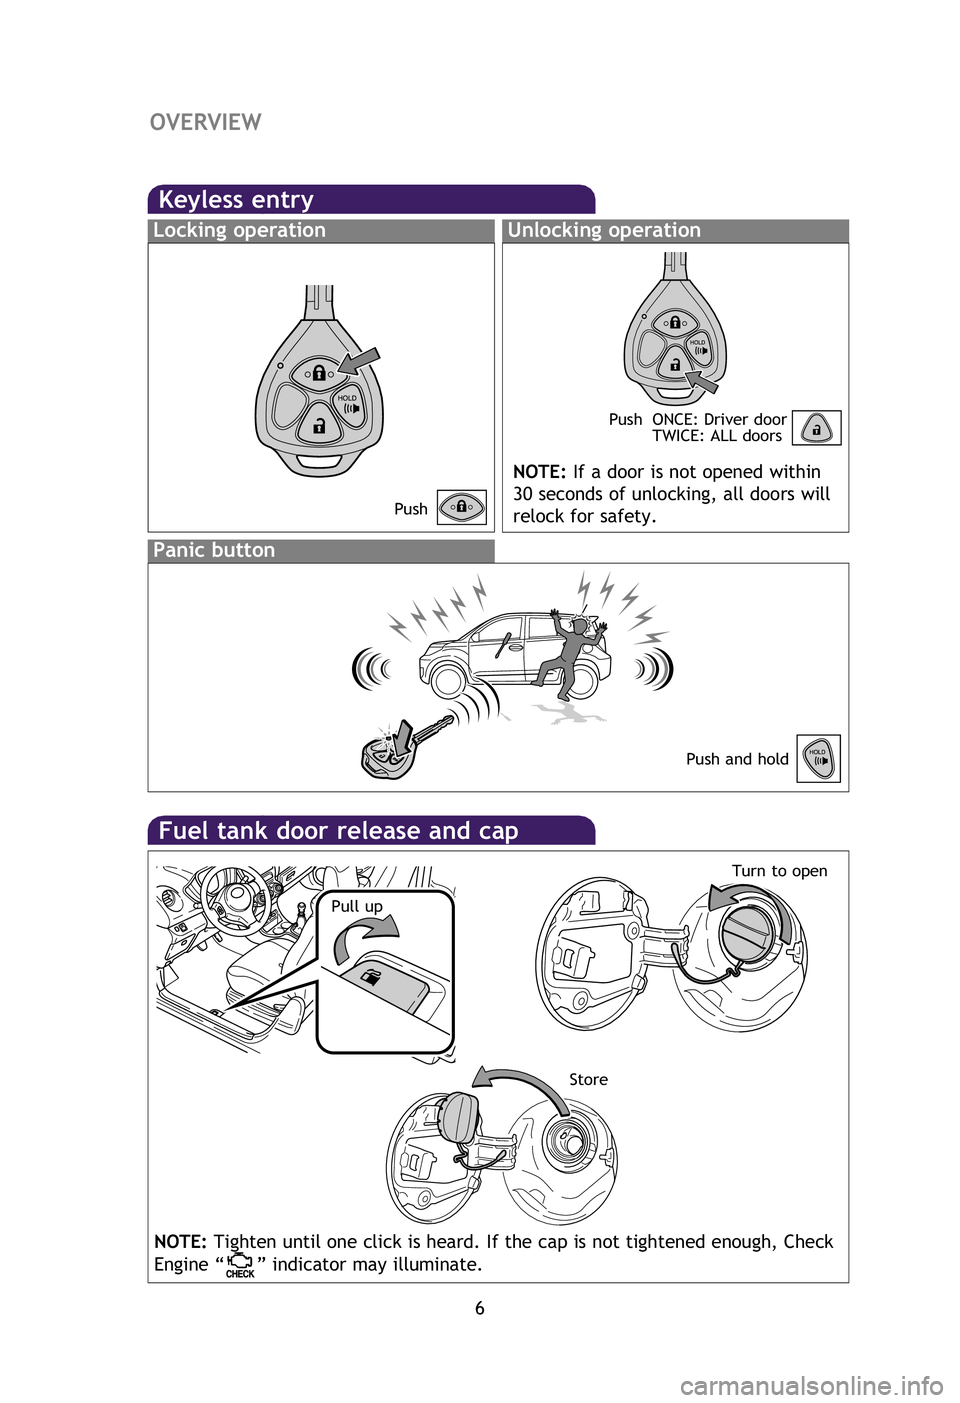 TOYOTA xD 2012  Owners Manual (in English) 6
OVERVIEW
Fuel tank door release and cap
Pull upStoreTurn to open
Keyless entry
Locking operationUnlocking operation
NOTE:
If a door is not opened within
30 seconds of unlocking, all doors will
reloc